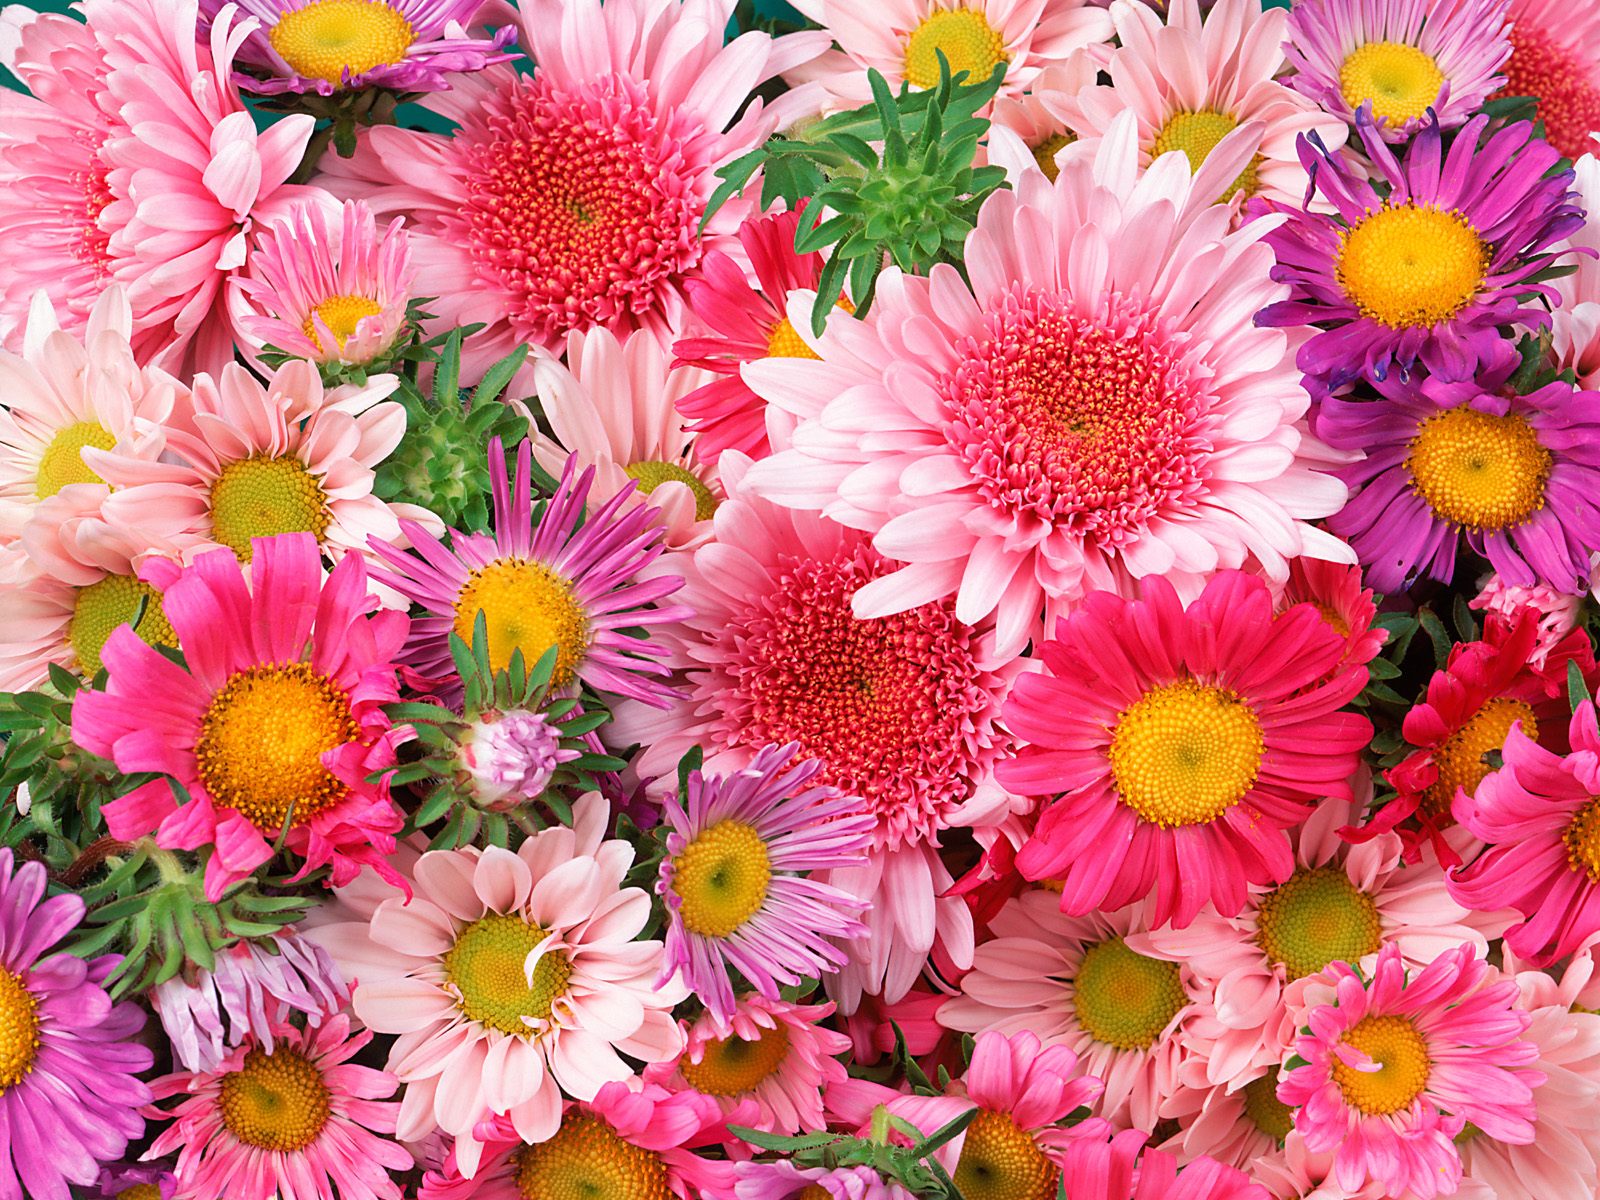 Download High quality Flowers wallpaper / Nature / 1600x1200